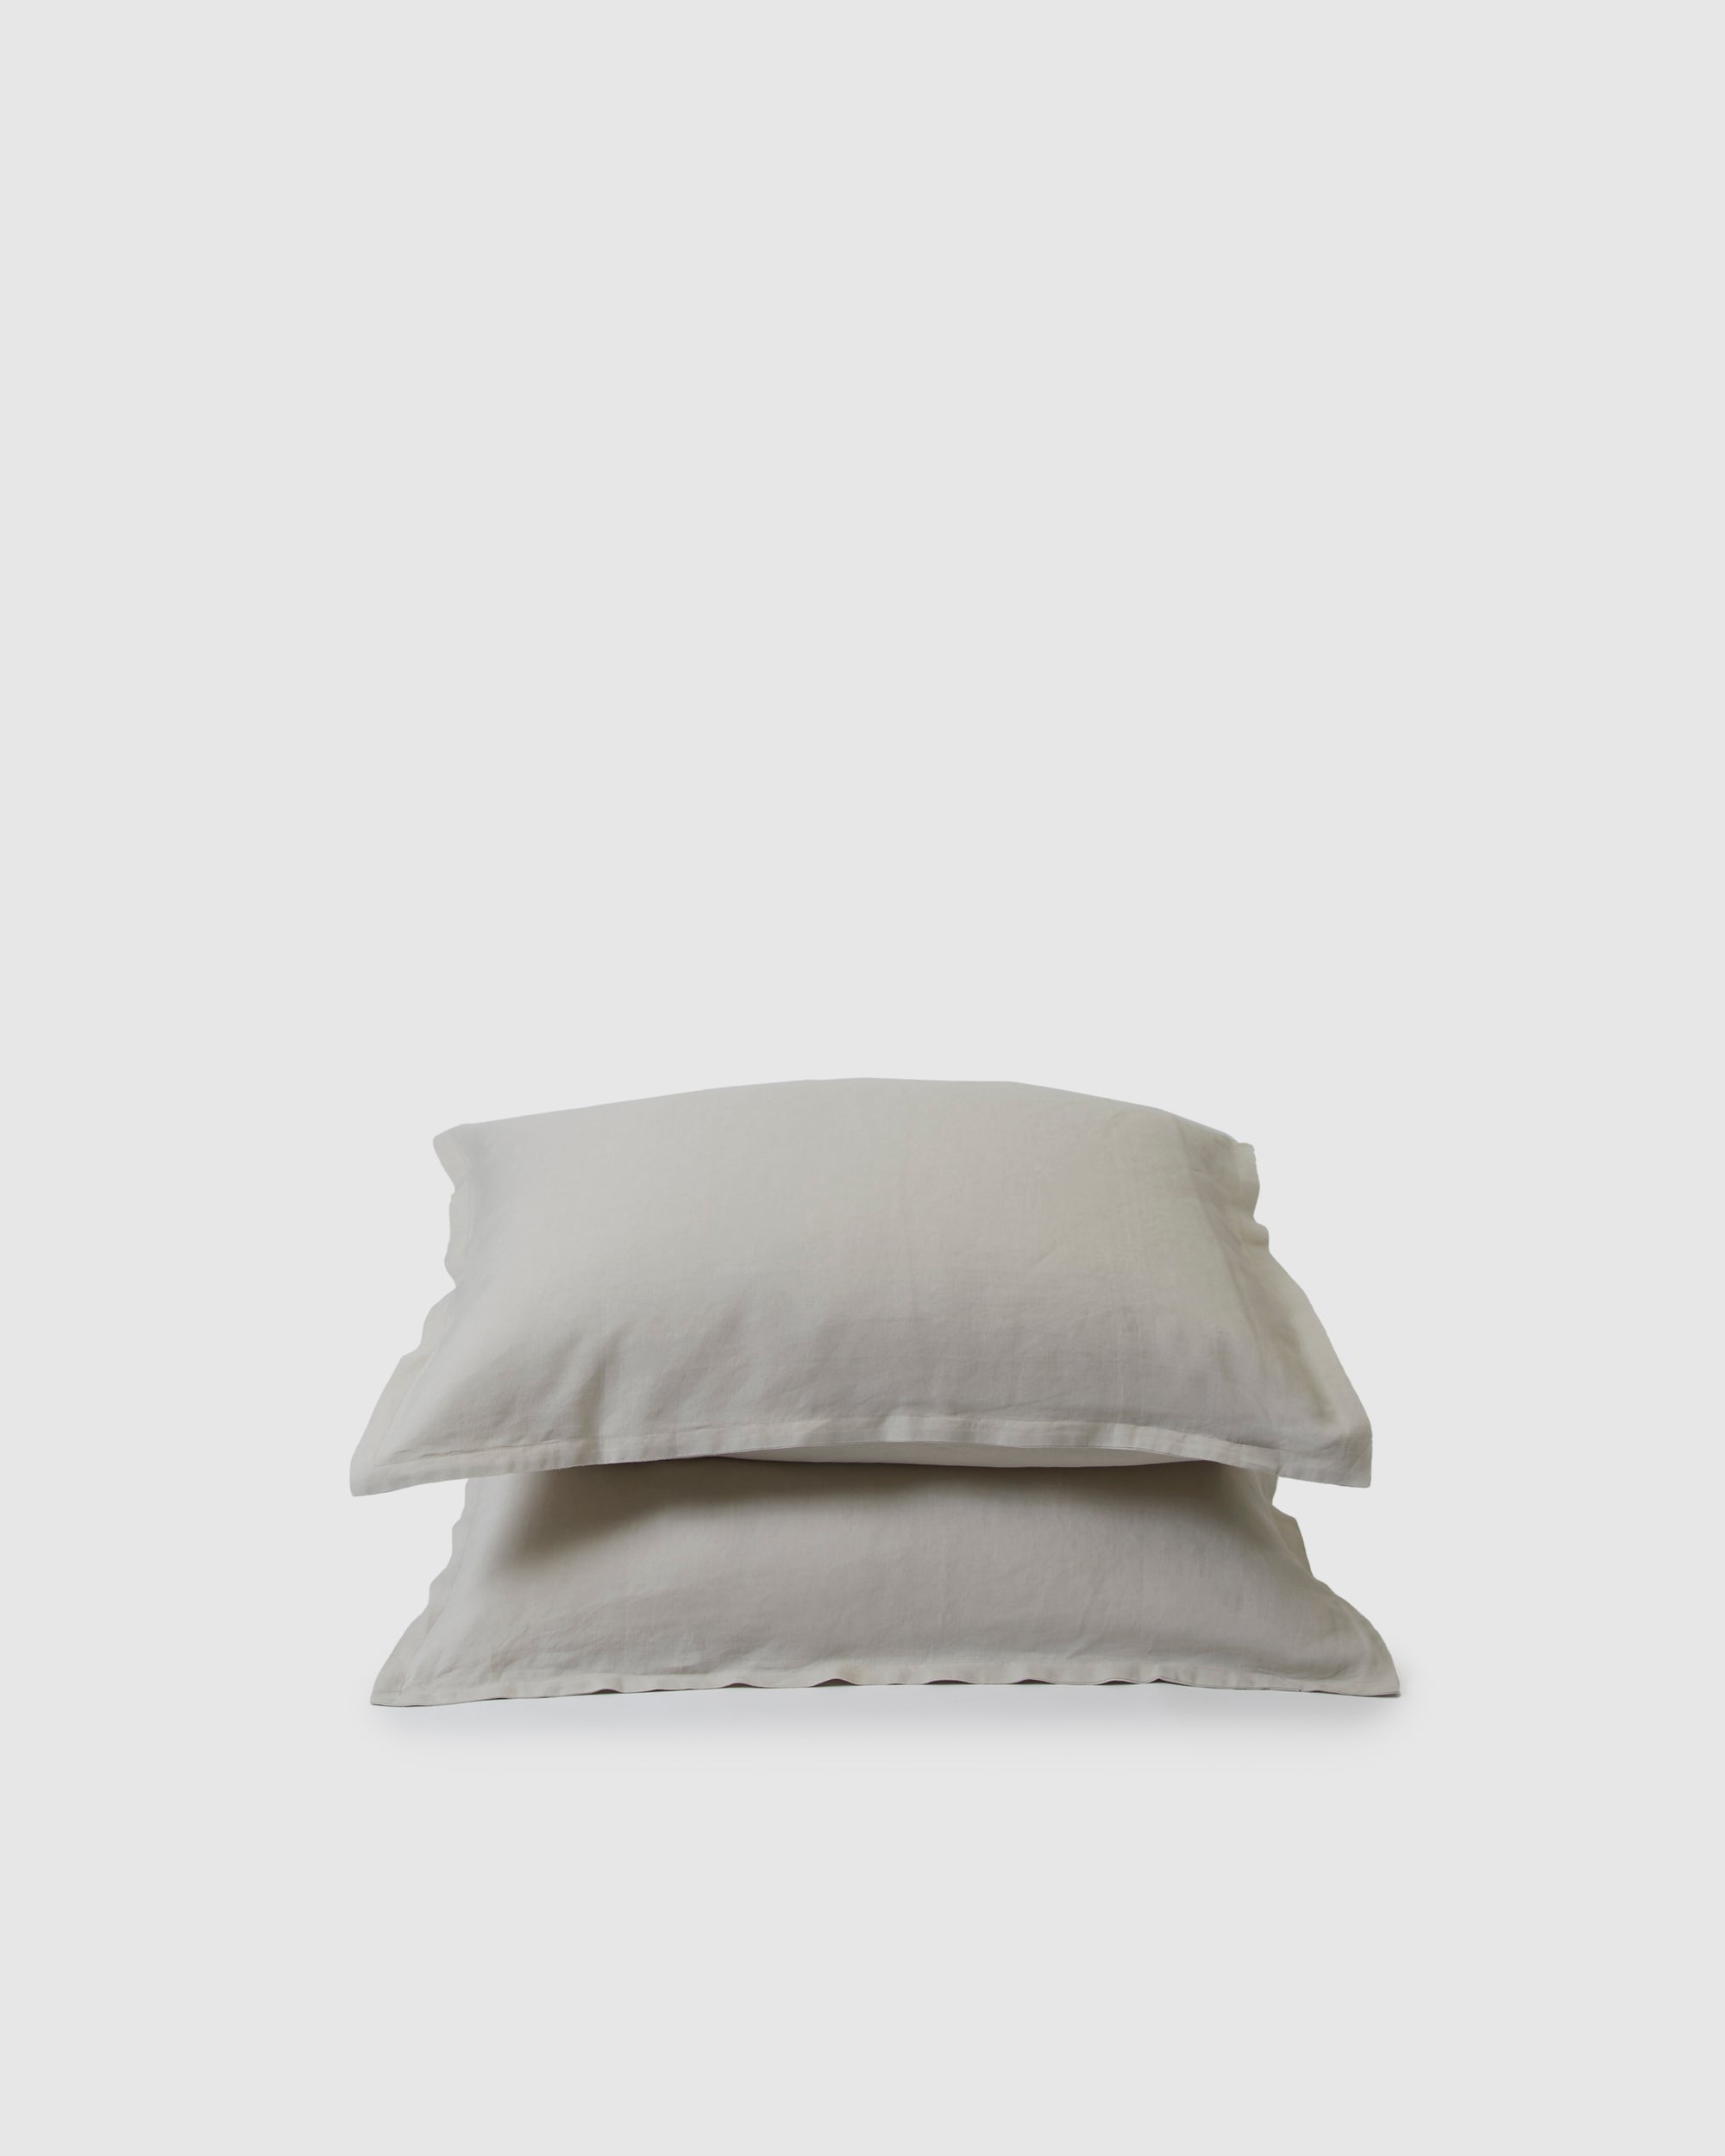 Pair of filled pillowcases in light dove gray